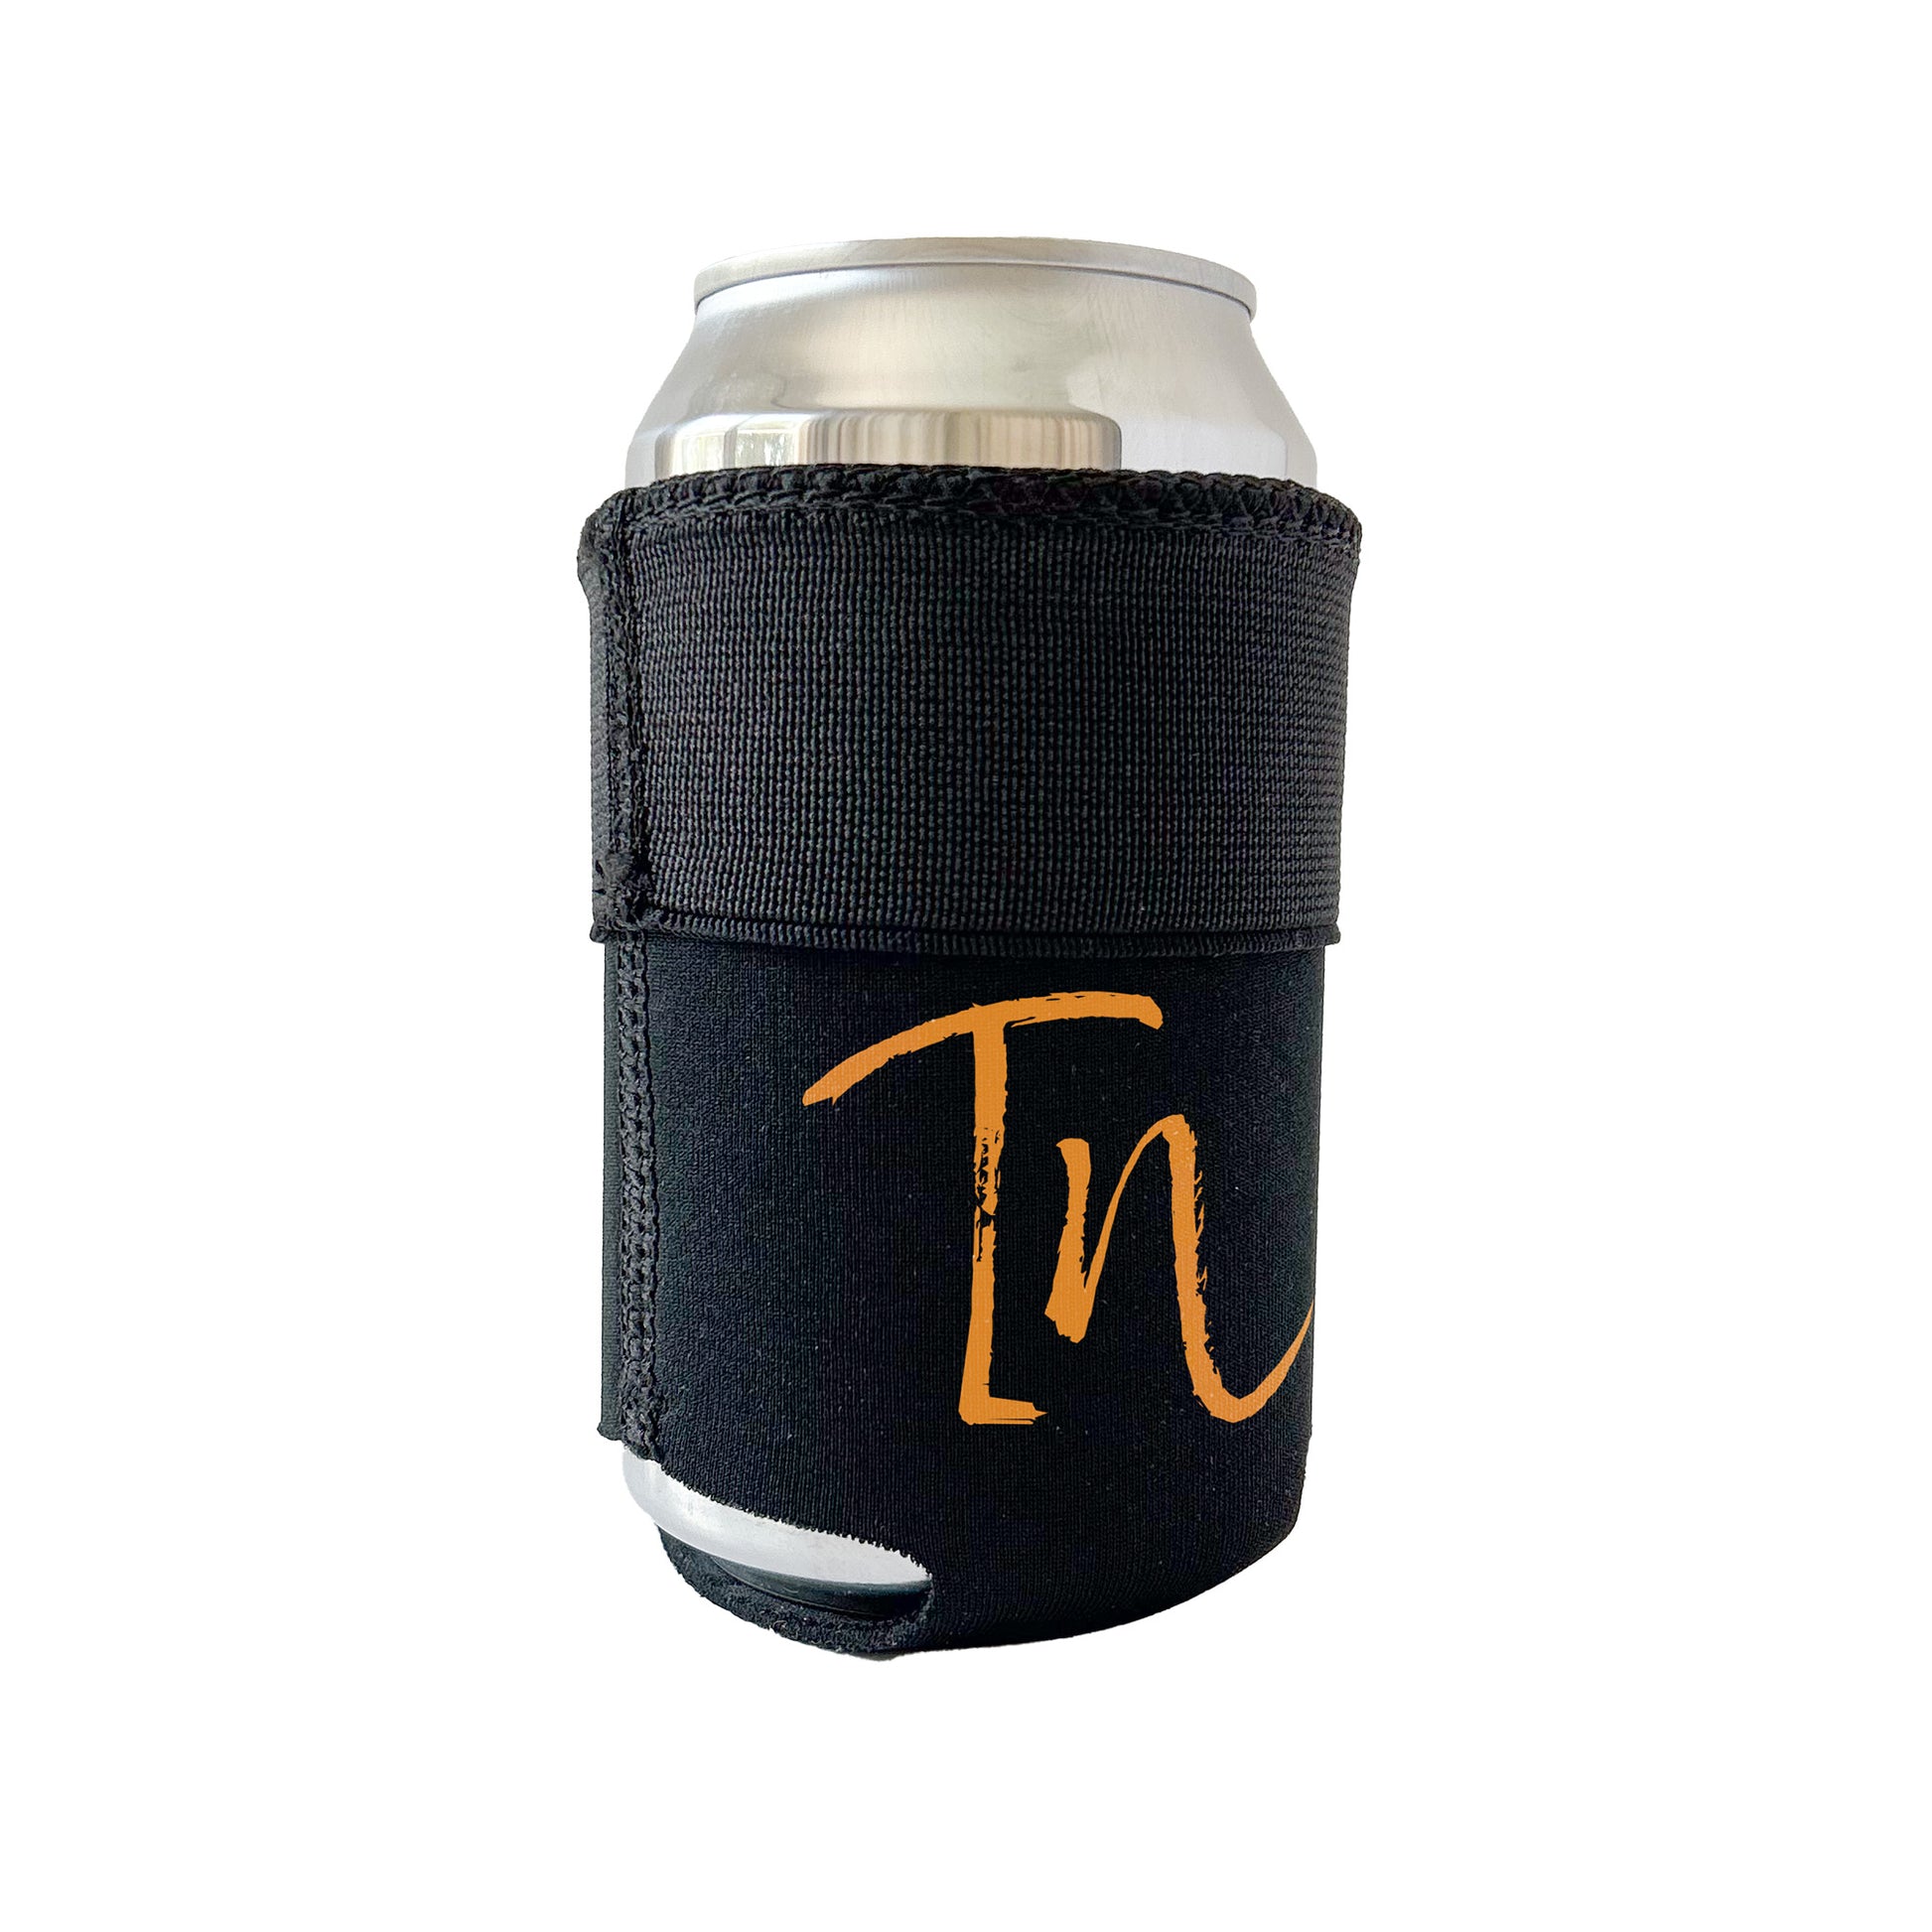 Black Candabra Hero with bright orange TN design. Neoprene and elastic multi-conforming beverage sleeve. Shown on a standard 12 oz can. Illustrates elastic top folded down, to fit a standard can